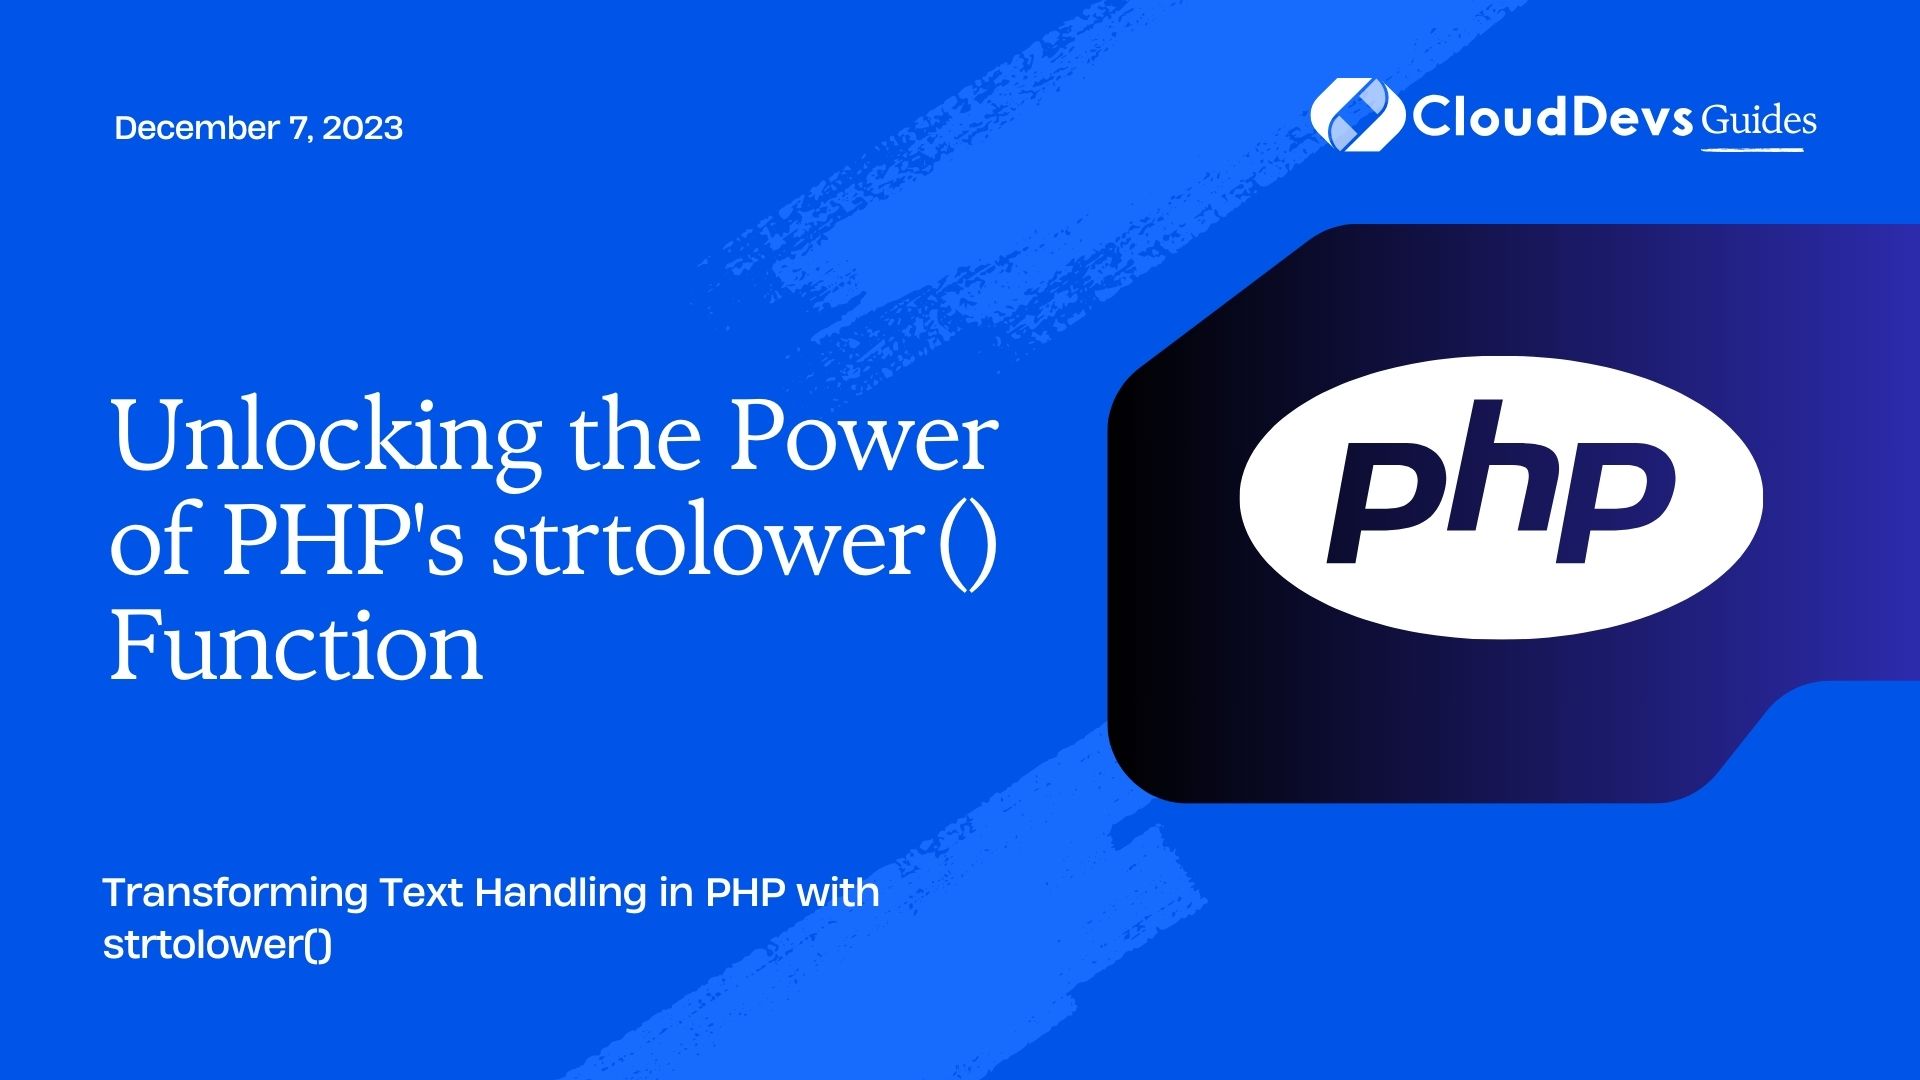 Unlocking the Power of PHP's strtolower() Function